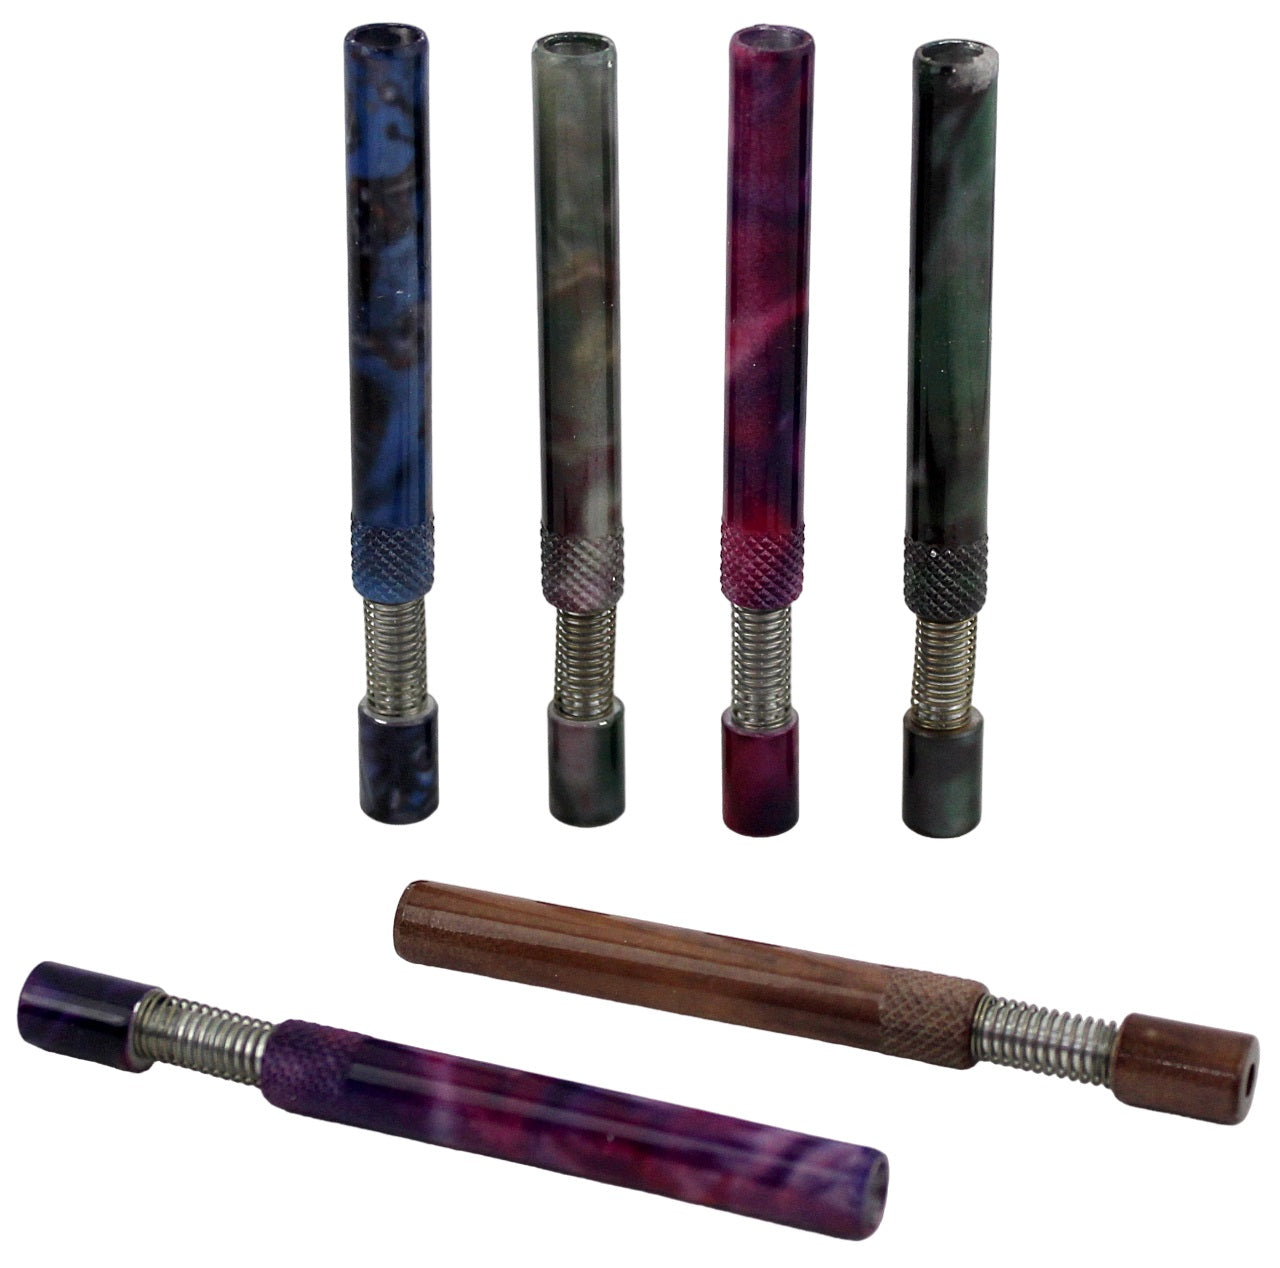 Spring Loaded Metal Pipe One HItter Chillum - Mix Colors Design 50pk